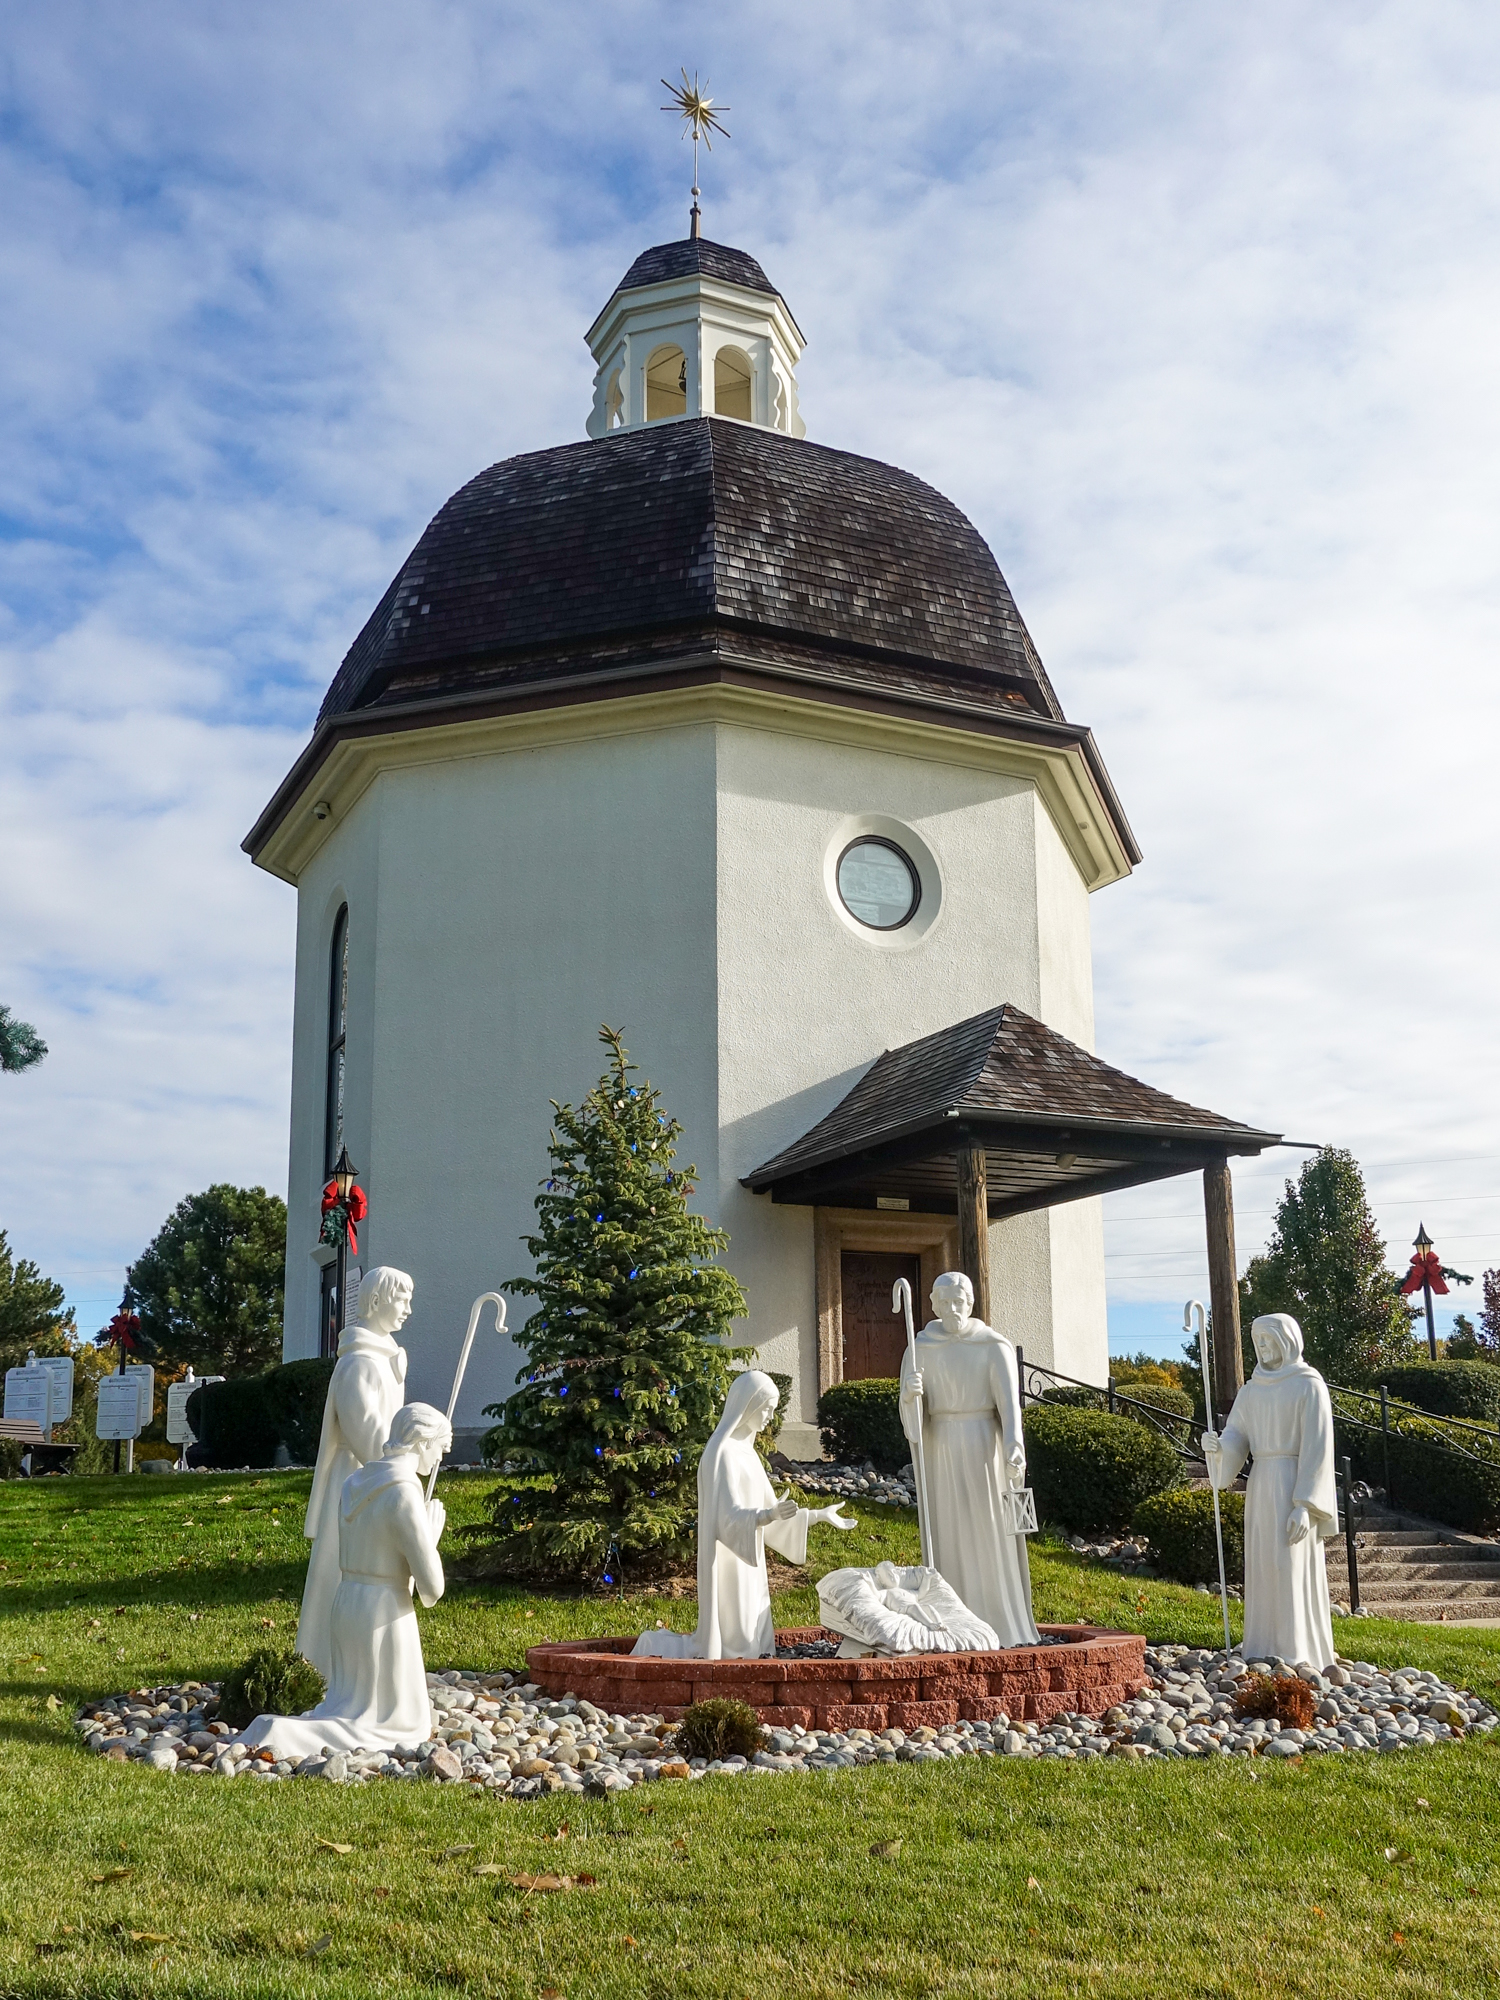 Located on the Southern end the grounds of Bronner’s sits the Silent Night Memorial Chapel. The chapel is a replica of the original chapel in Oberndorf/Salzburg, Austria, which marks the site where “Silent Night” was first sung on Christmas Eve in 1818.